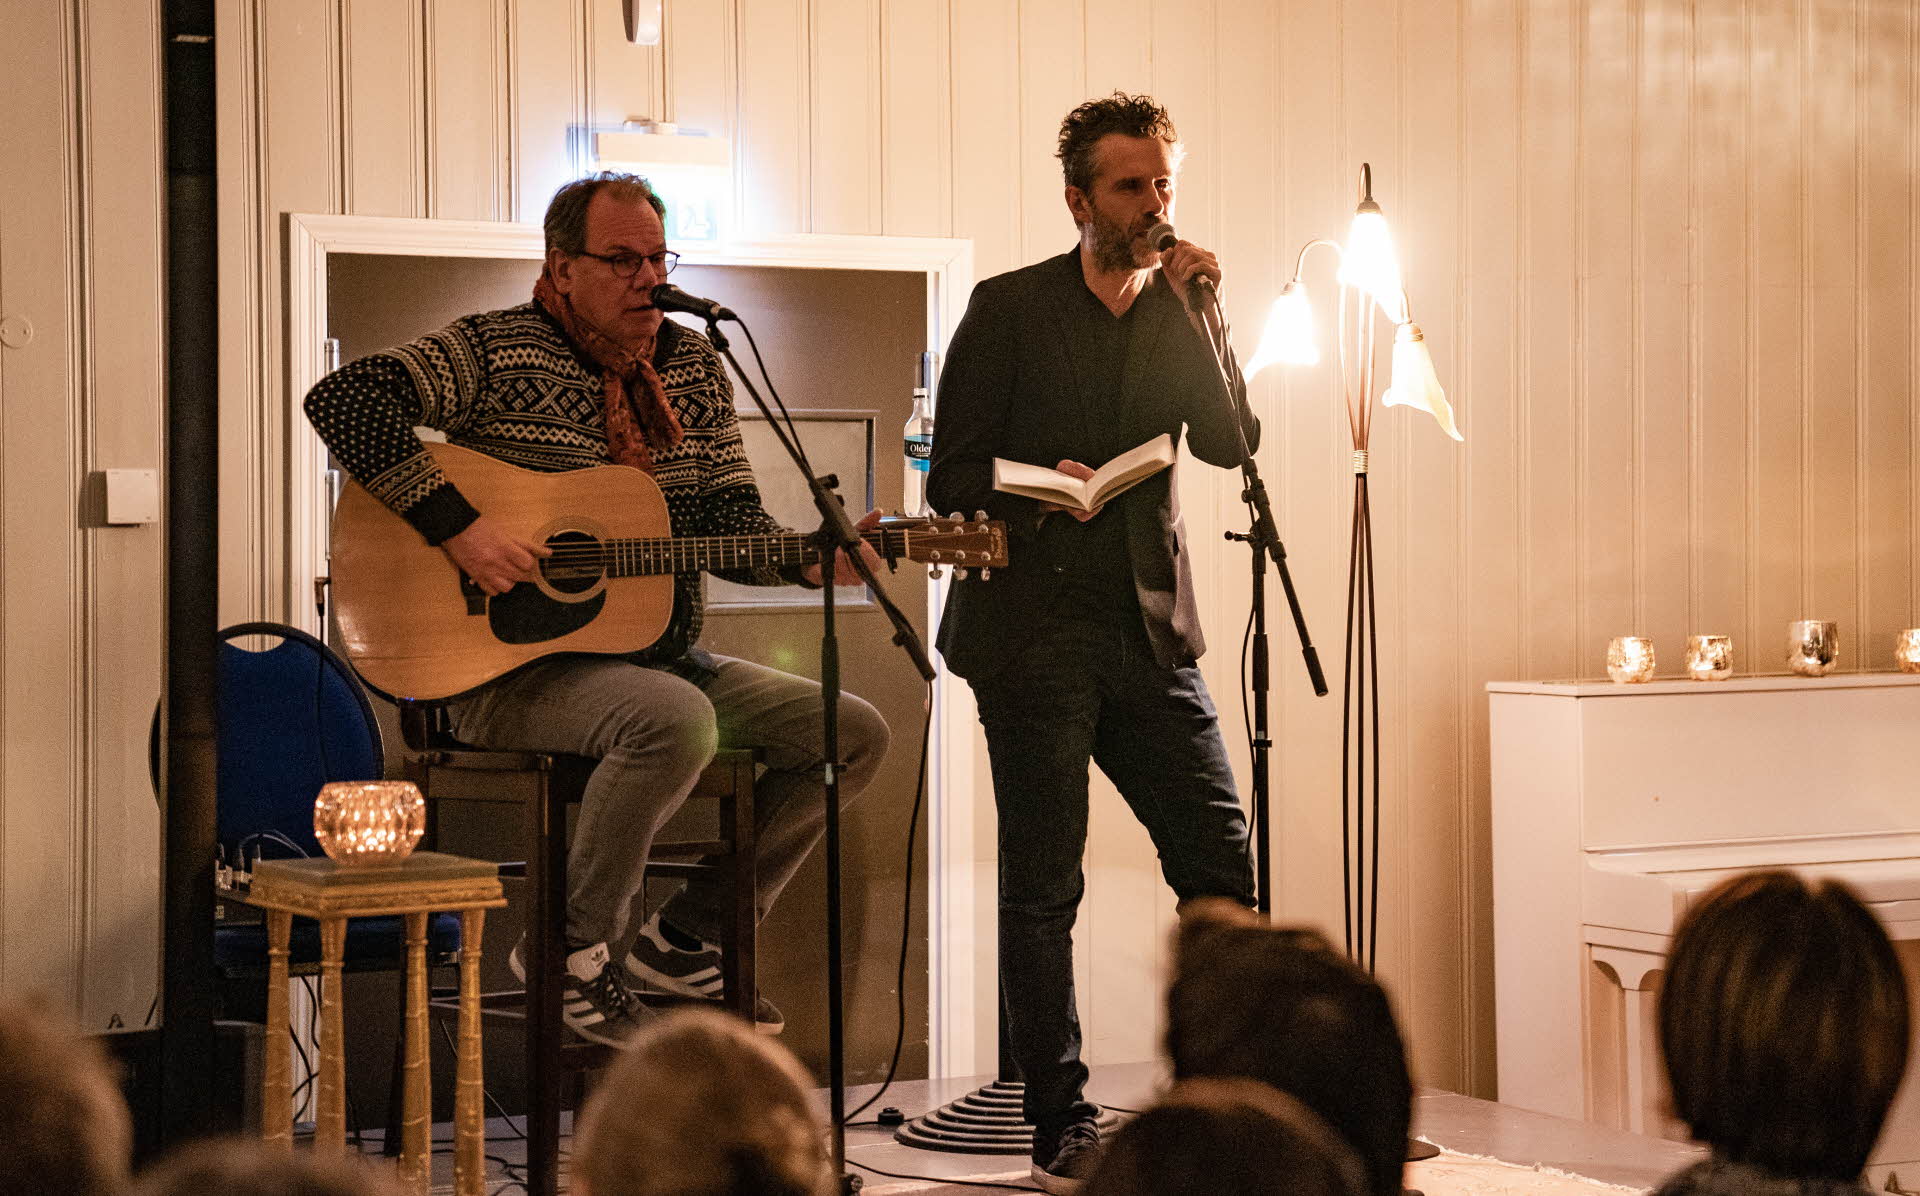 A man reading from a book into a microphone and another singing and playing guitar on a stage at Fretheim Hotel.